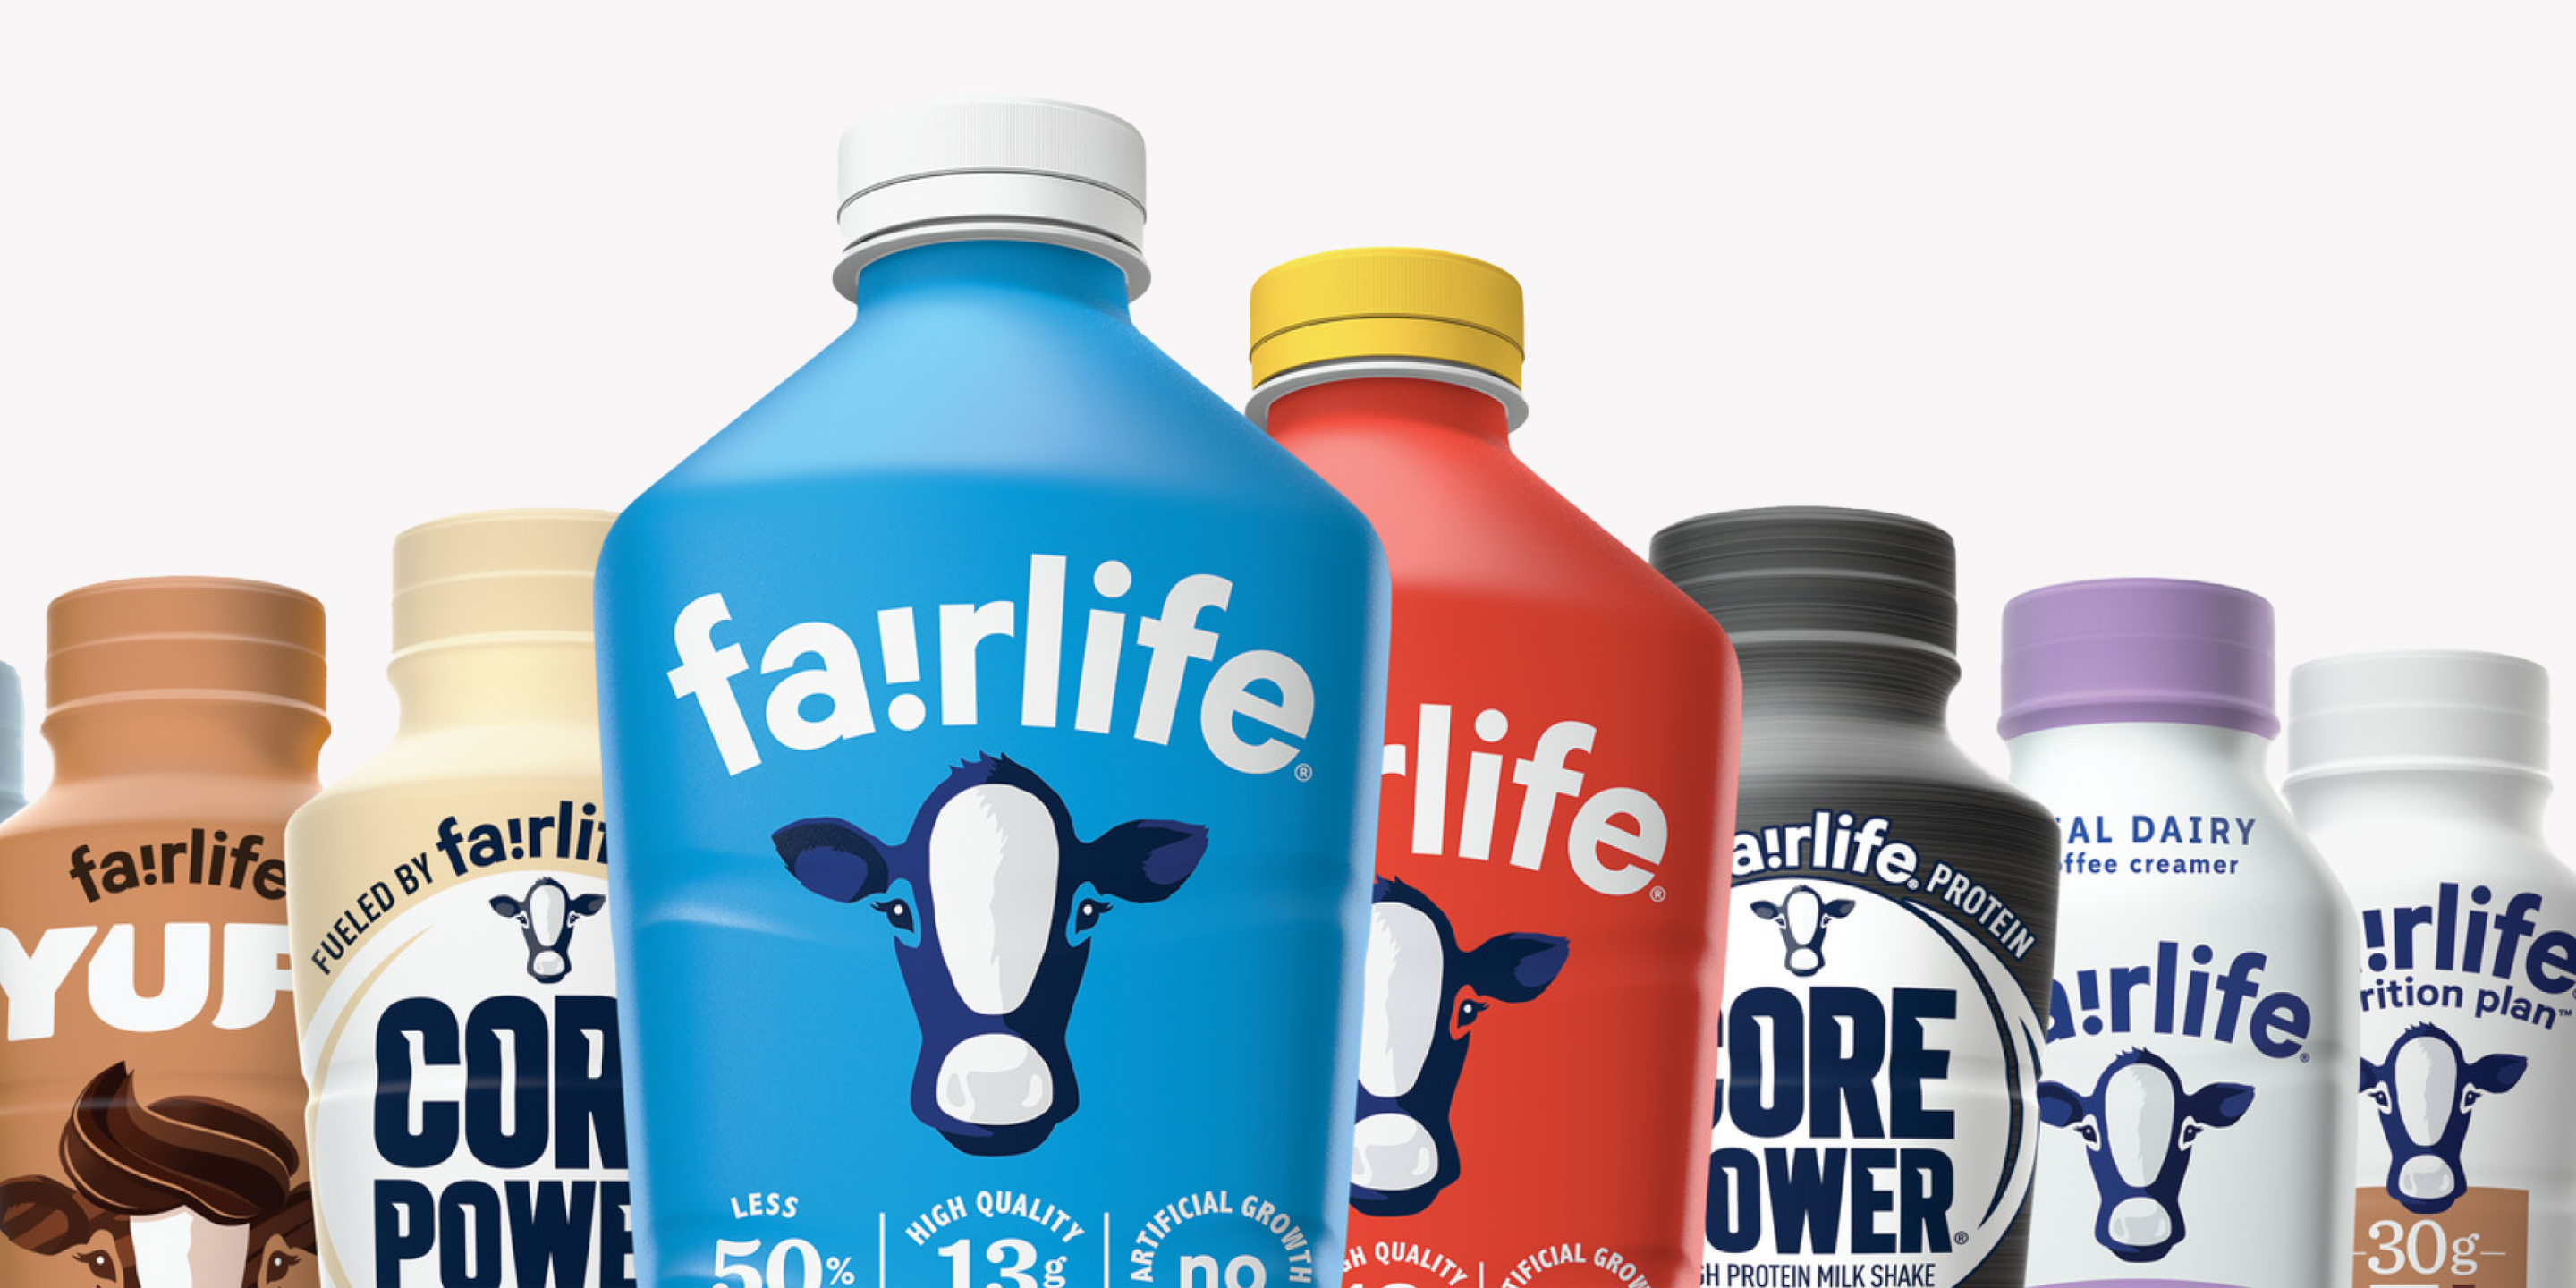 Fairlife promotional image of some of their dairy products